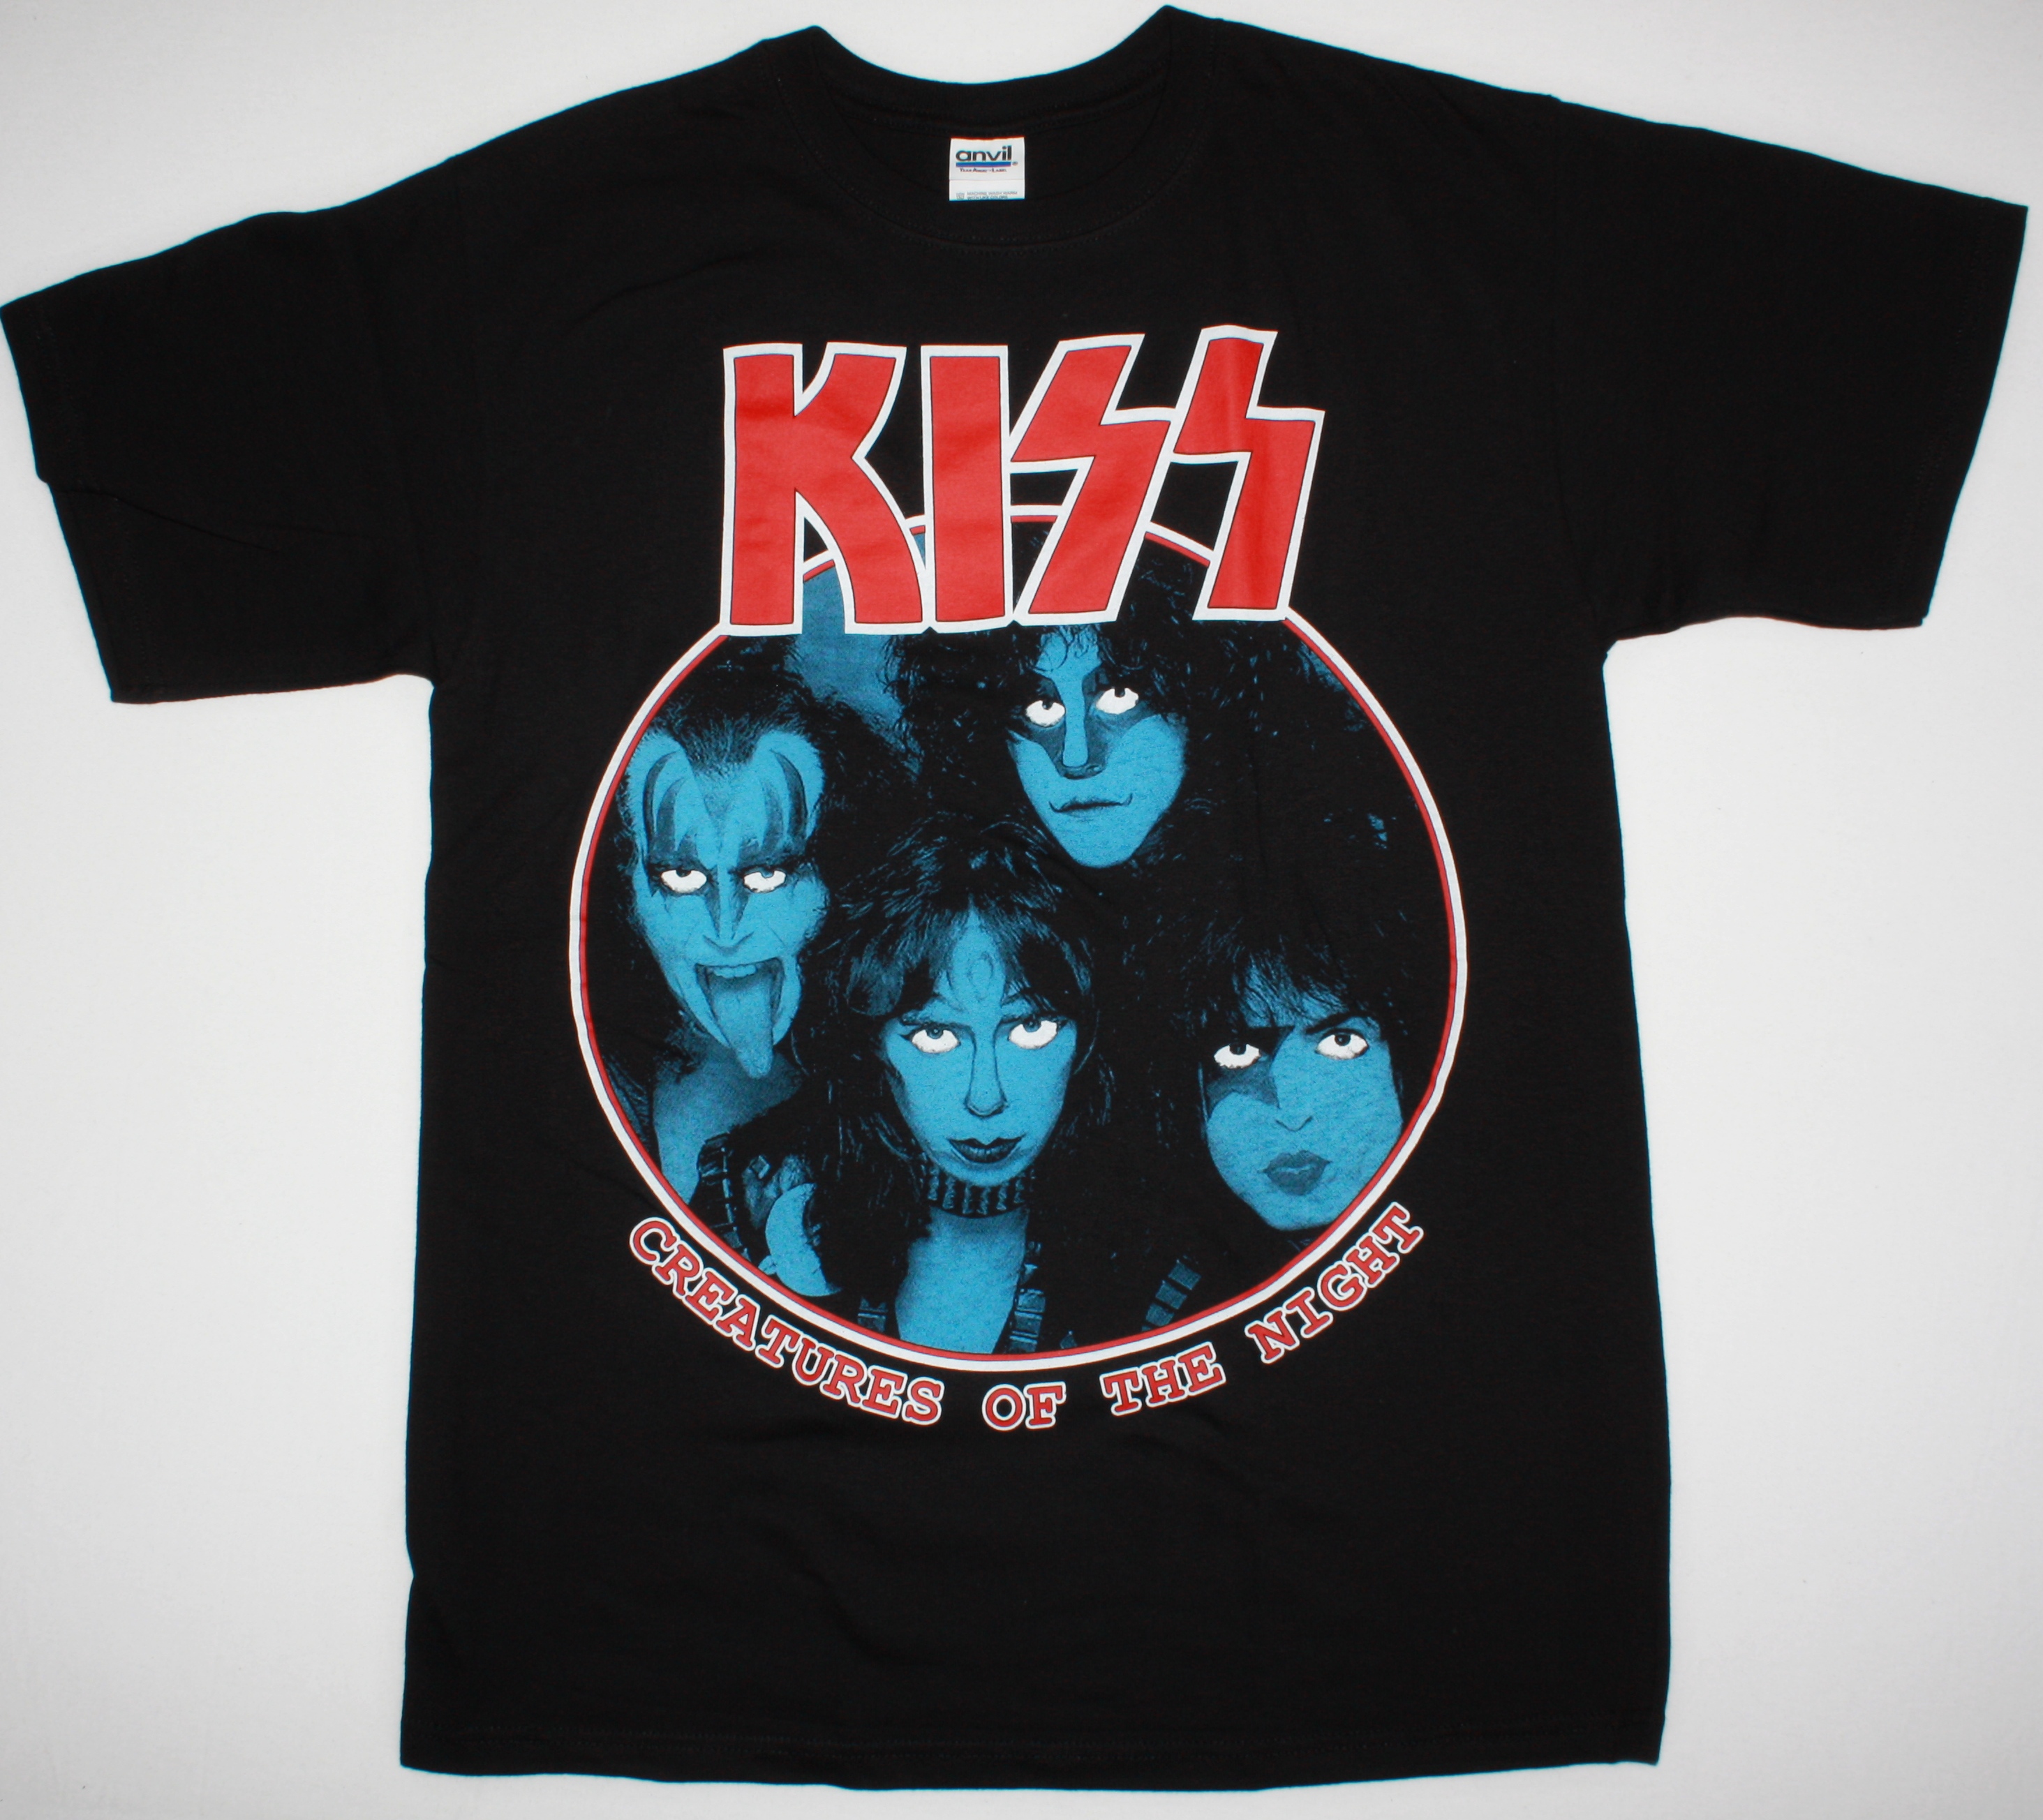 KISS CREATURES OF THE NIGHT ANNIVERSARY TOUR 1983 NEW BLACK T